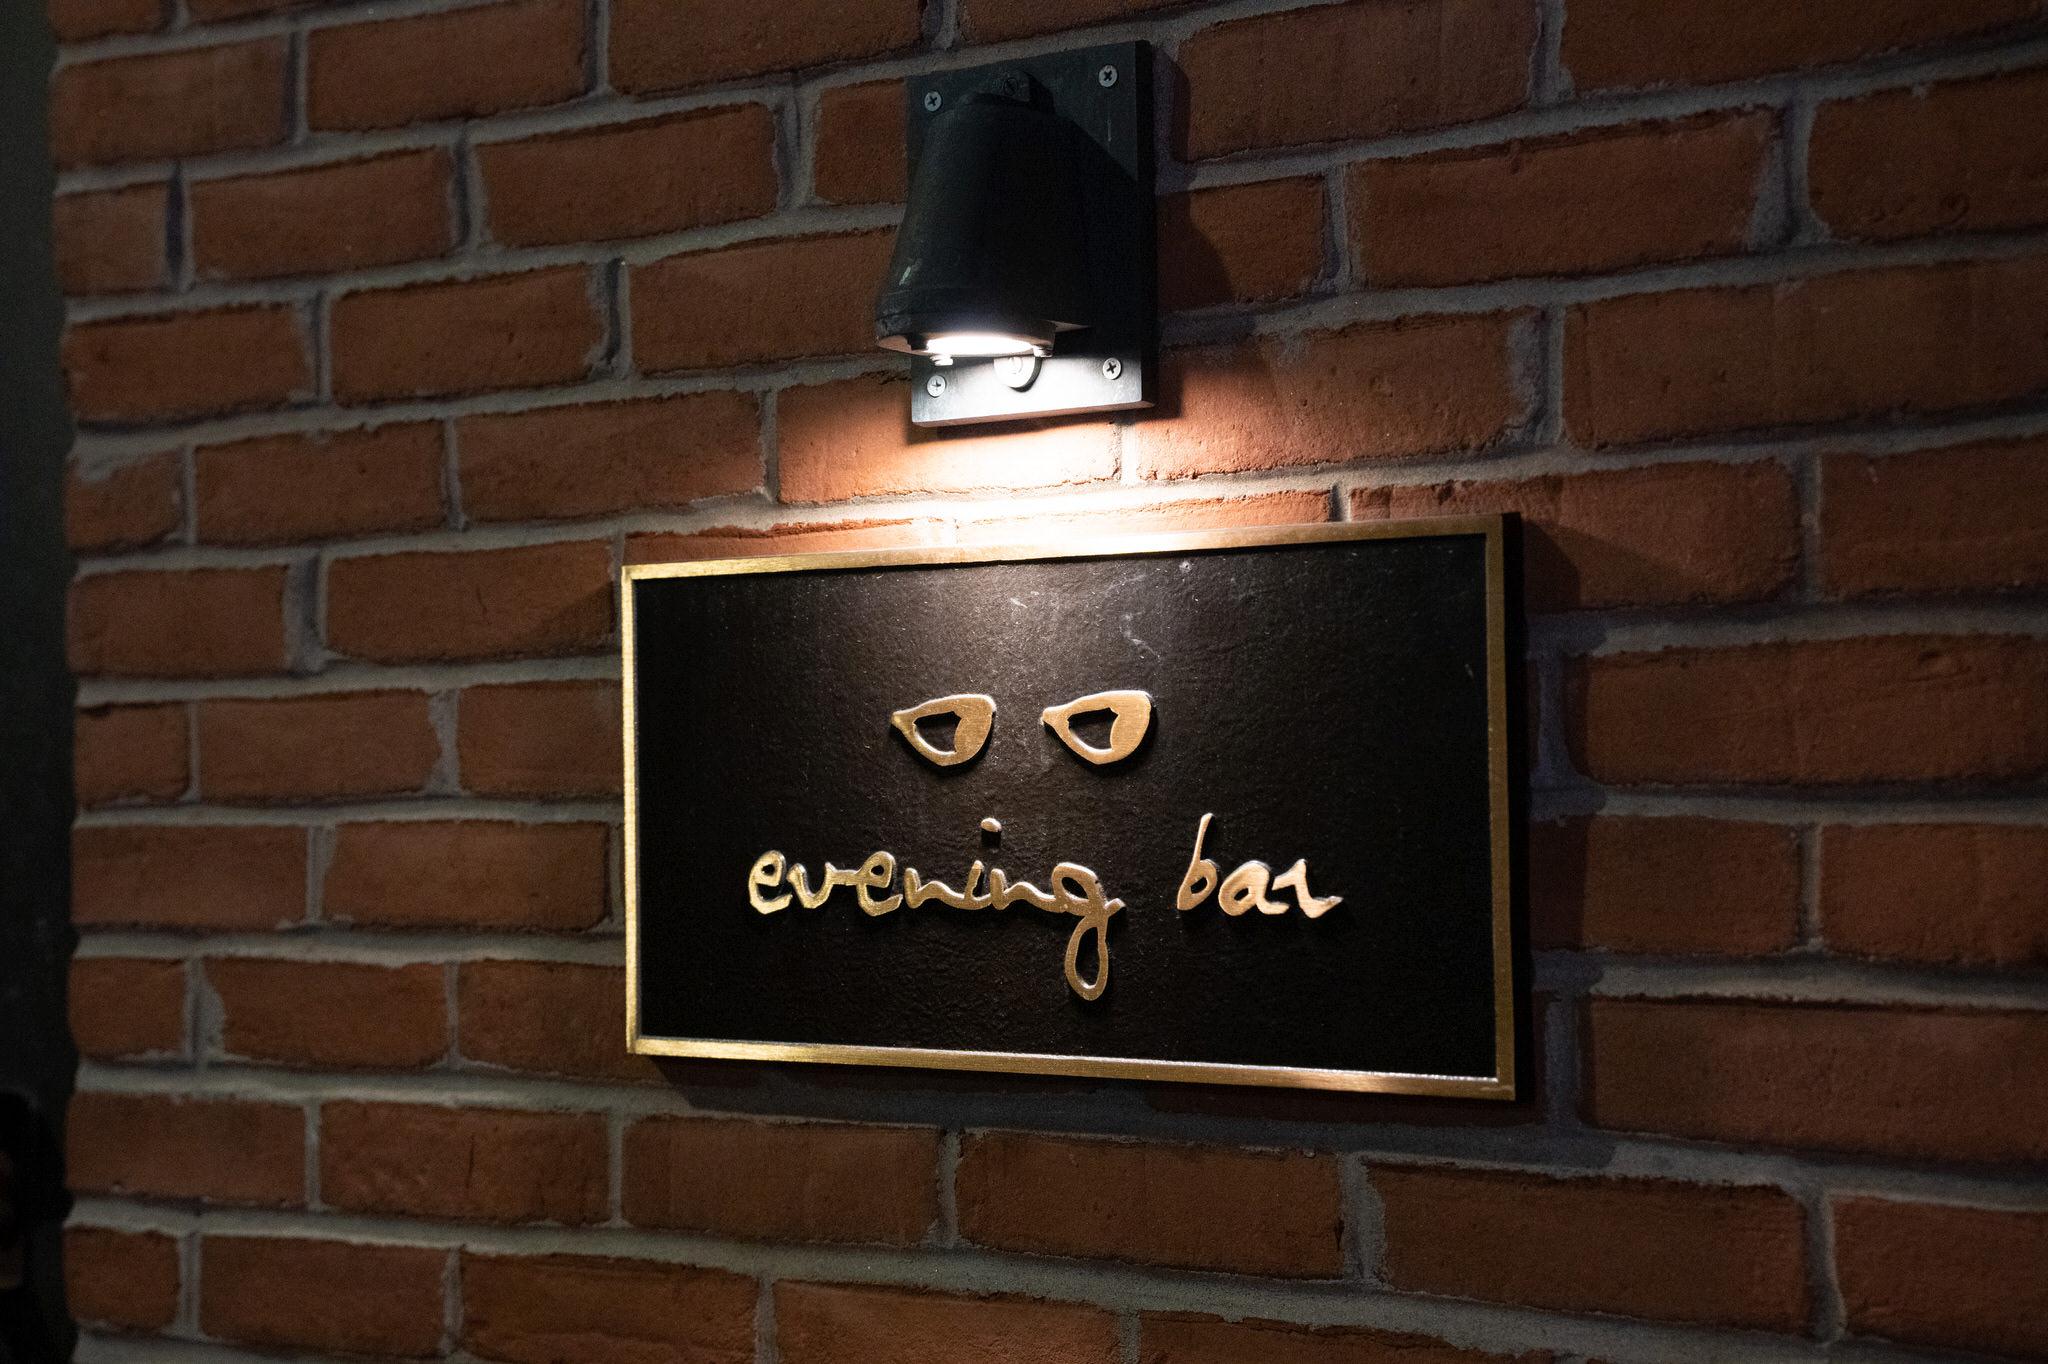 The Evening Bar sign in Parker's Alley